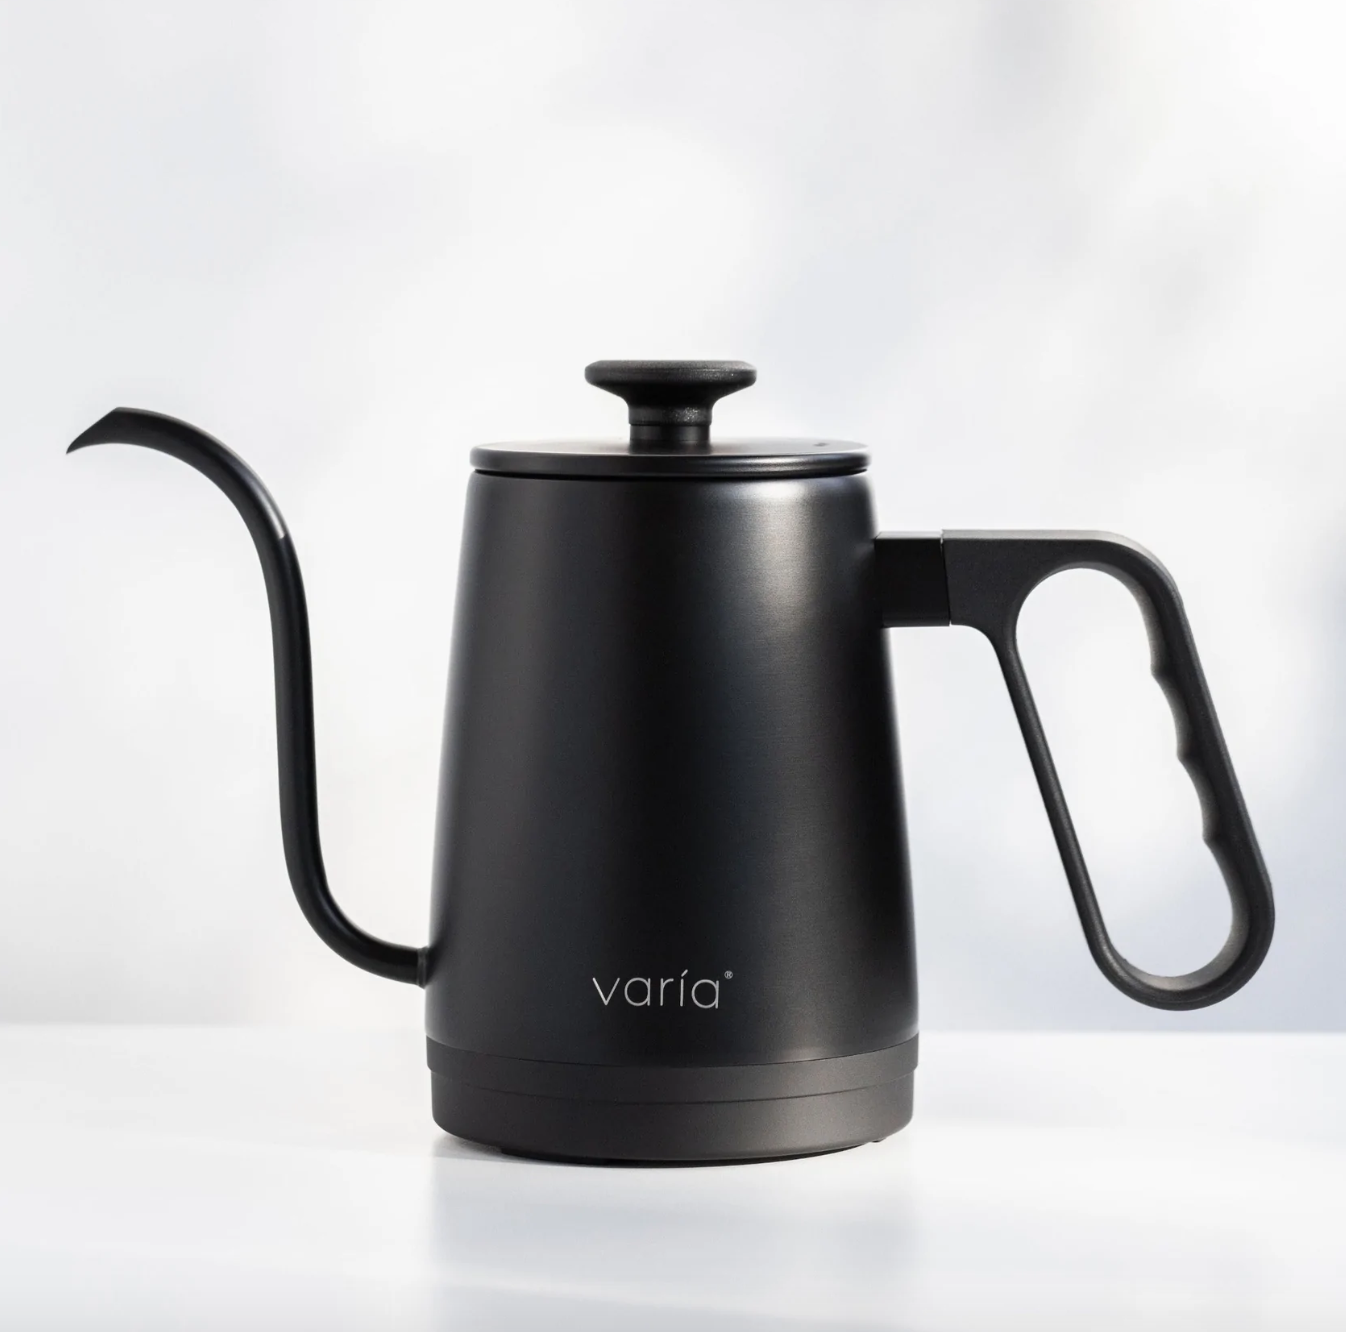 Electric kettle with smart temperature setting